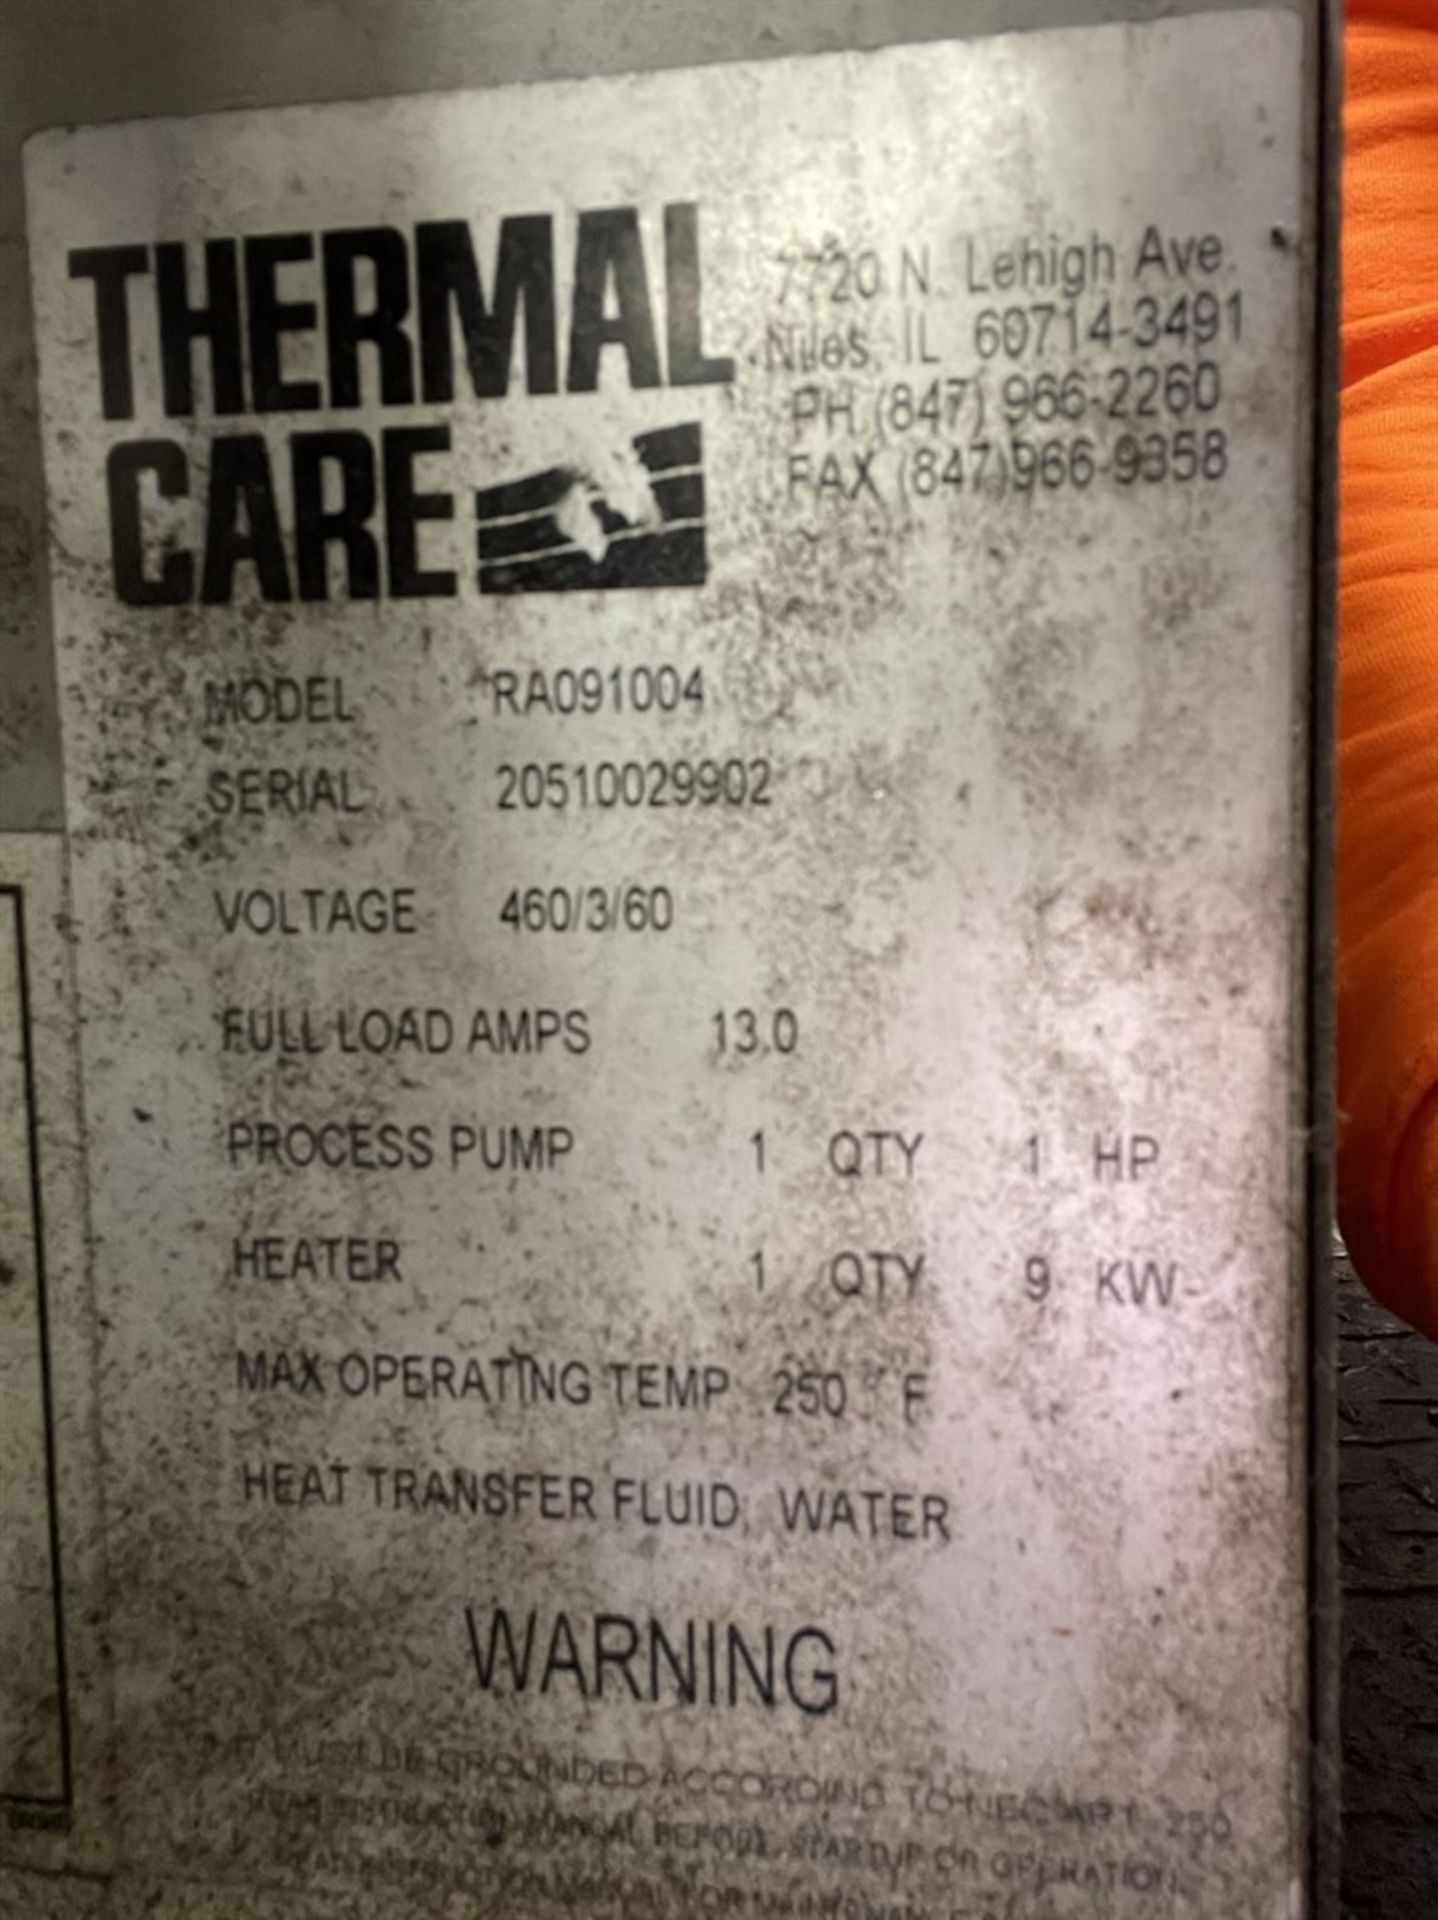 THERMAL CARE Aquatherm RA091004 Temperature Controller, s/n 20510029902 - Image 3 of 3